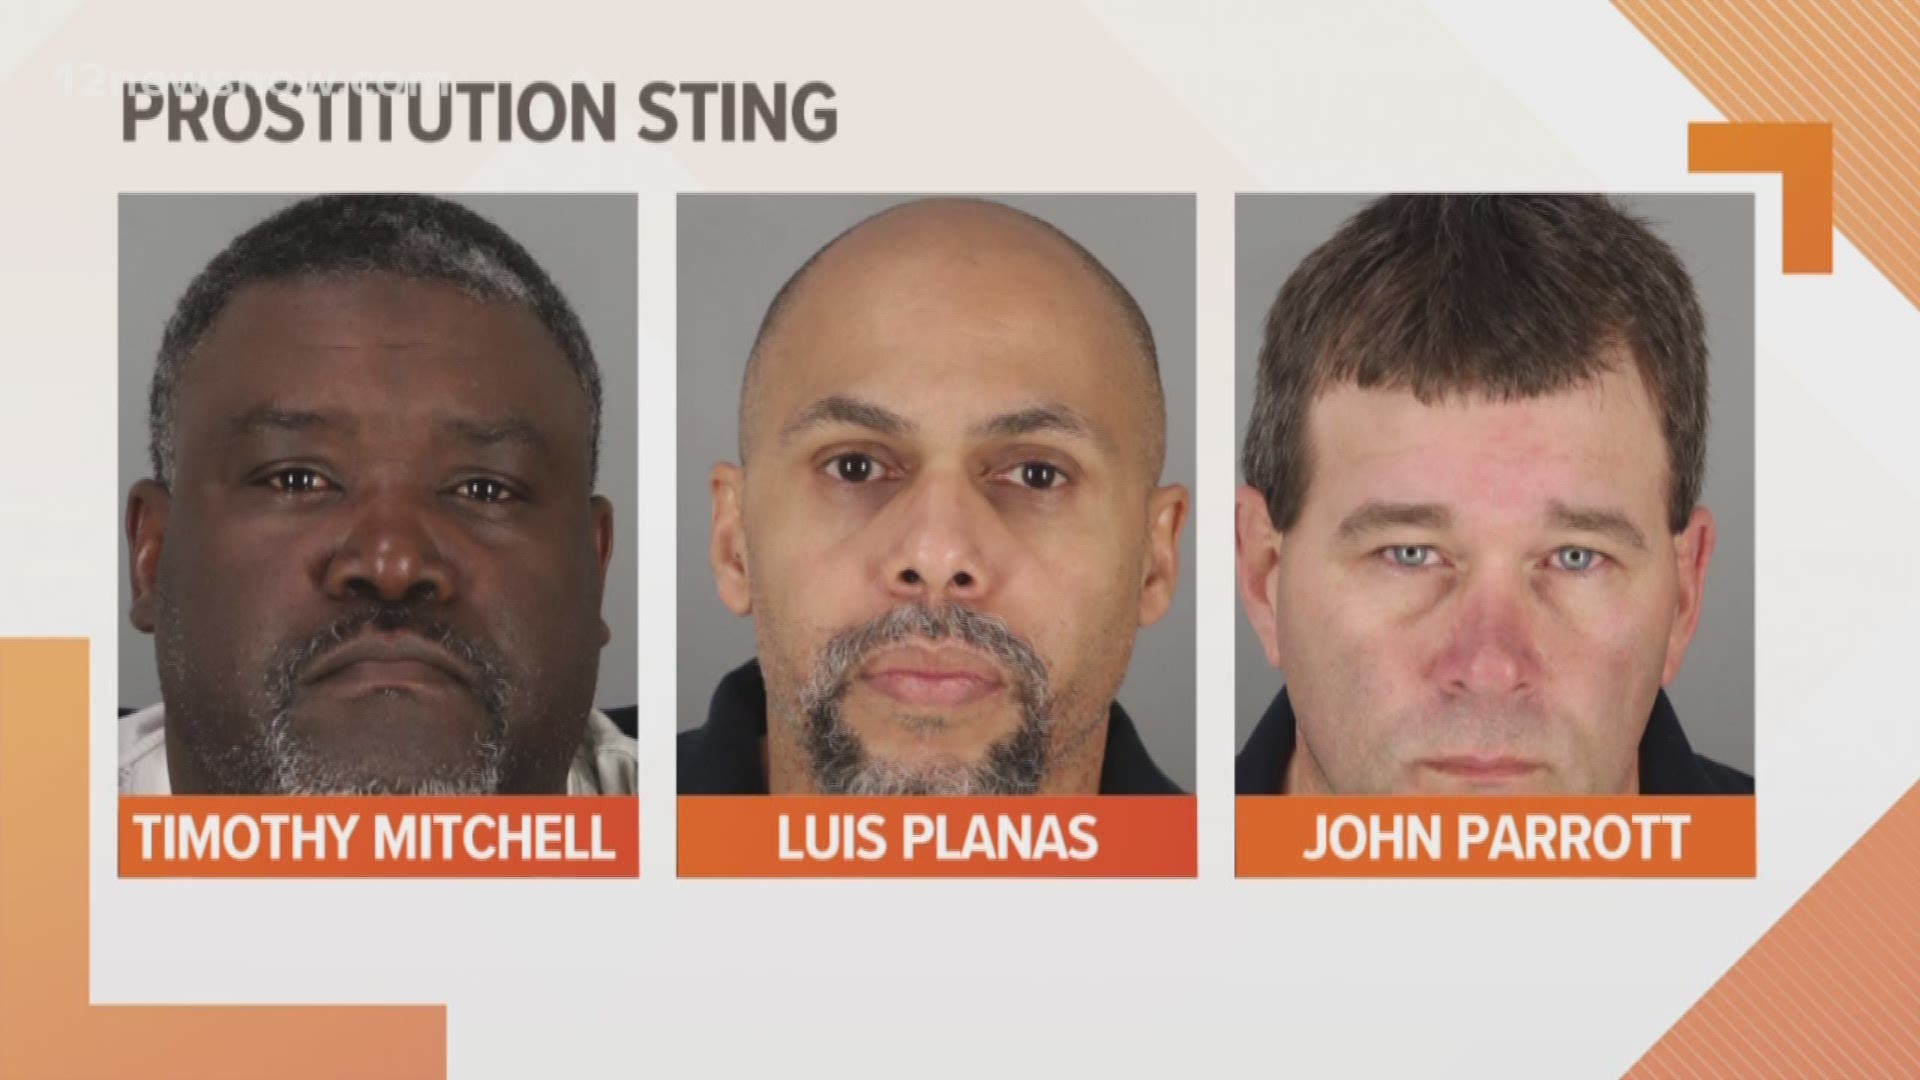 Six men arrested in prostitution sting following undercover operation in so...